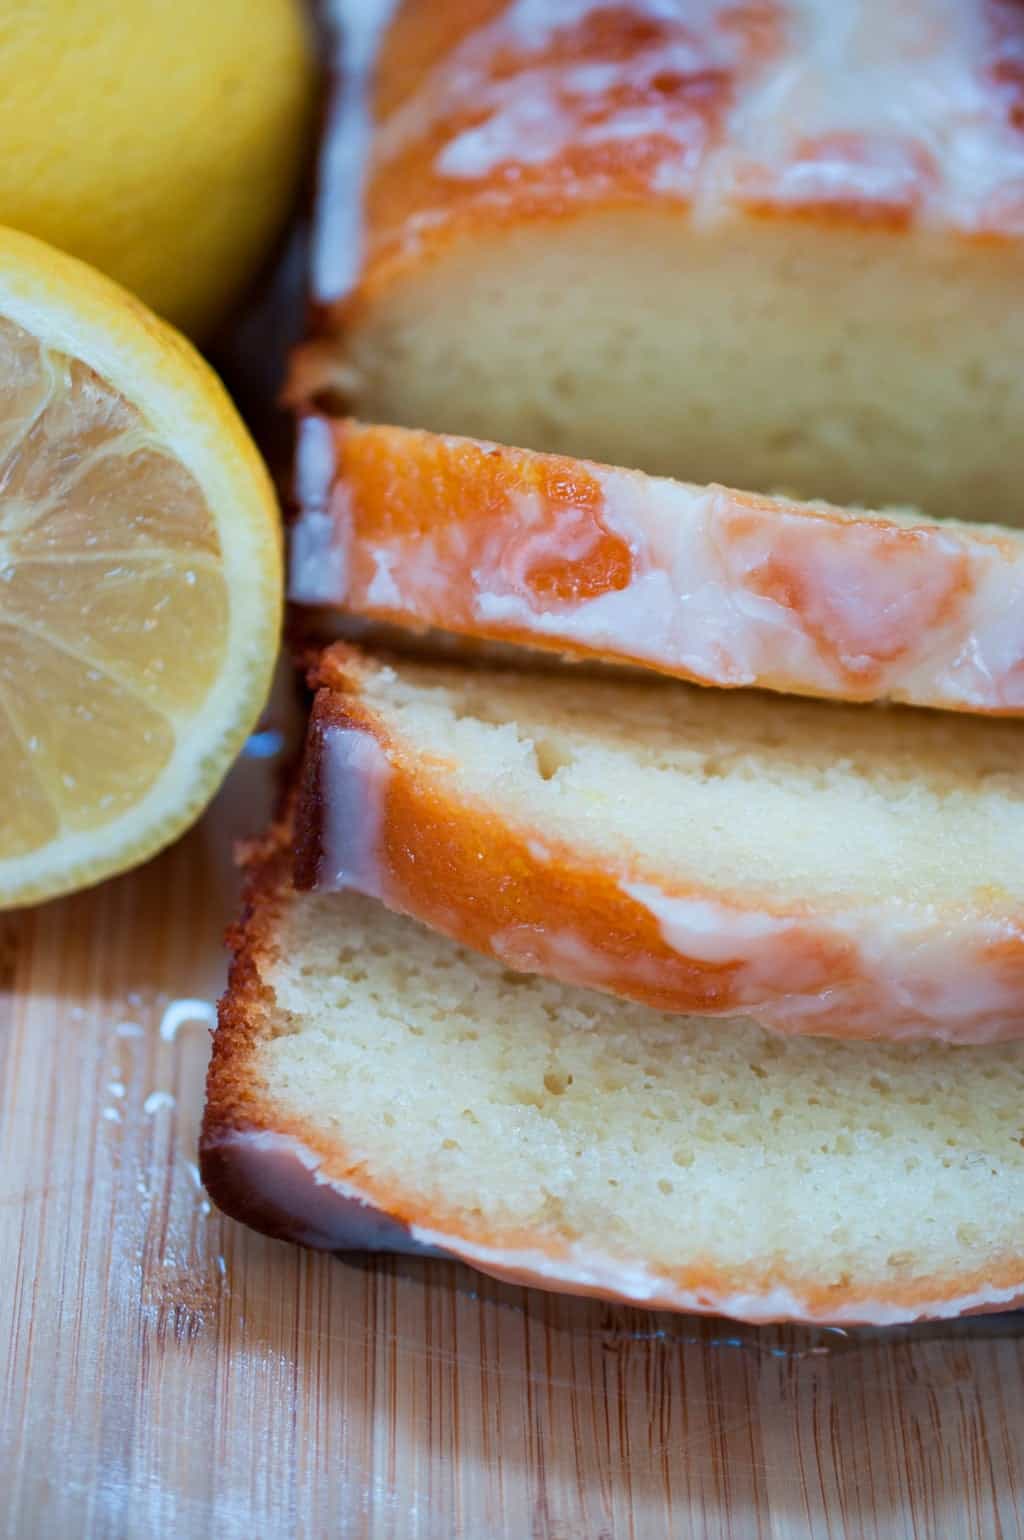 This Lemon Yogurt Cake without butter has a perfect moist texture and an amazing lemon flavor. An easy and delicious recipe from Ina Garten.